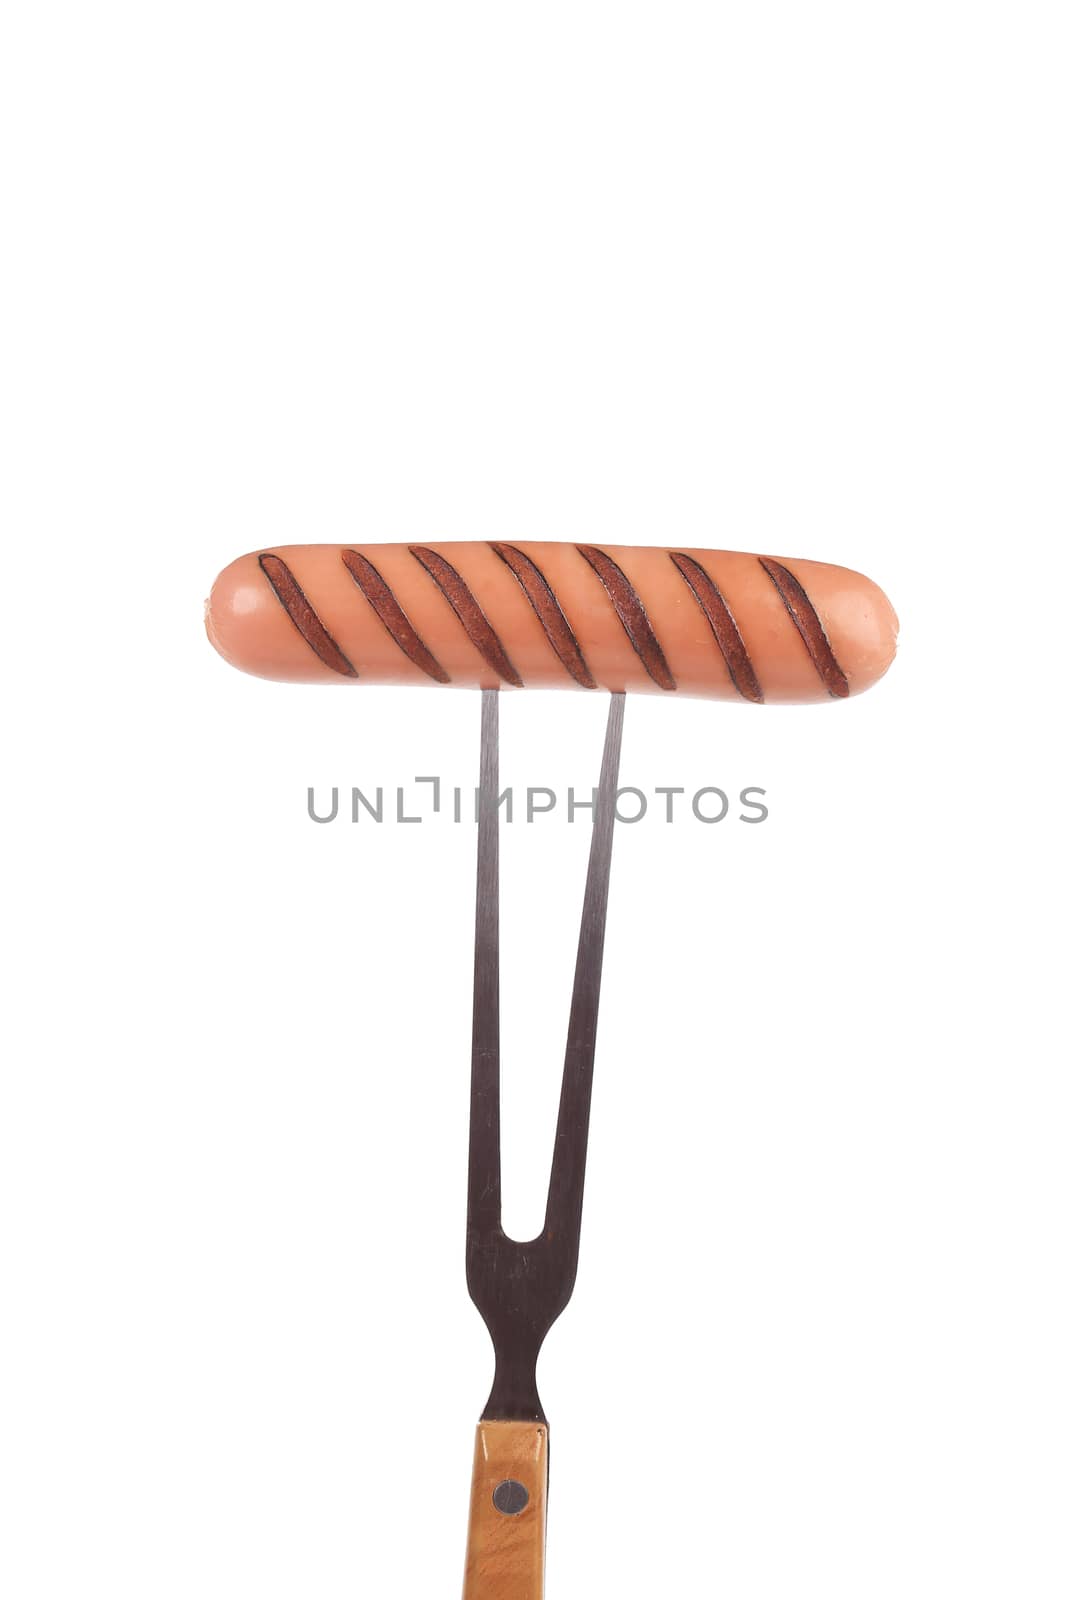 Grilled sausage on a fork. Isolated on a white background.